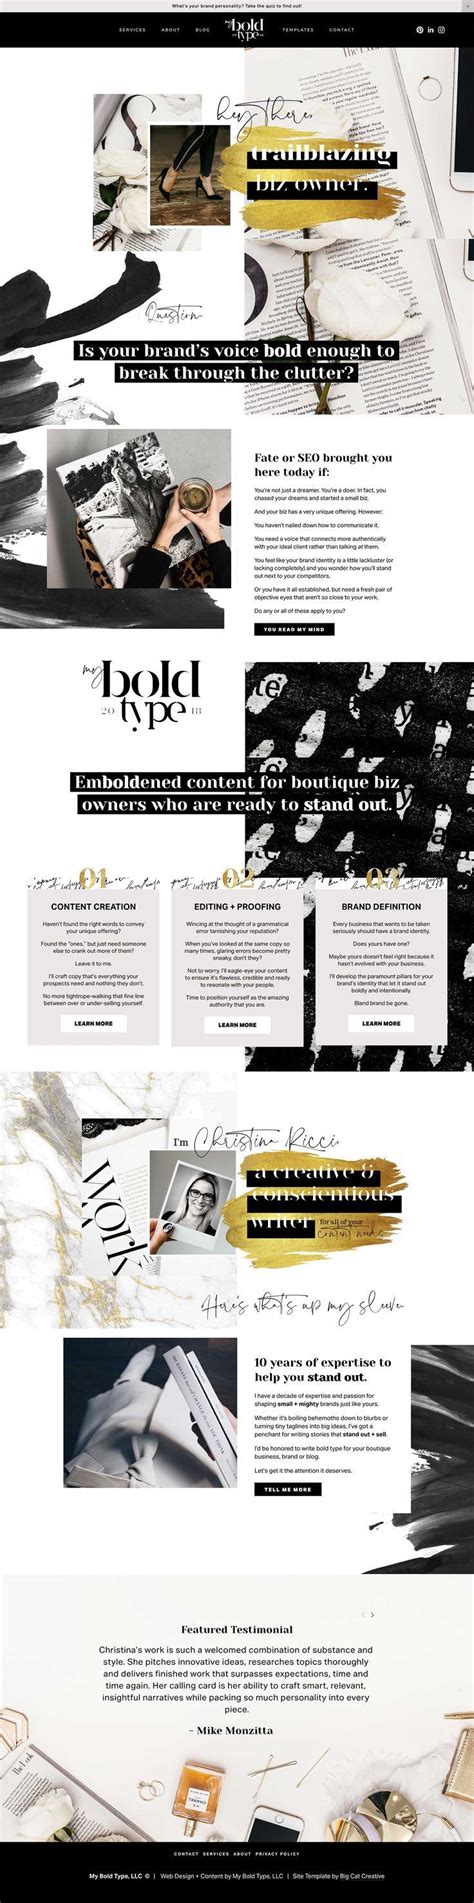 This article explains squarespace's different pricing options and lets you know which plan is right for your business: Luna Squarespace Template by Big Cat Creative - Easy to use Squarespace Template Kits - Squ ...